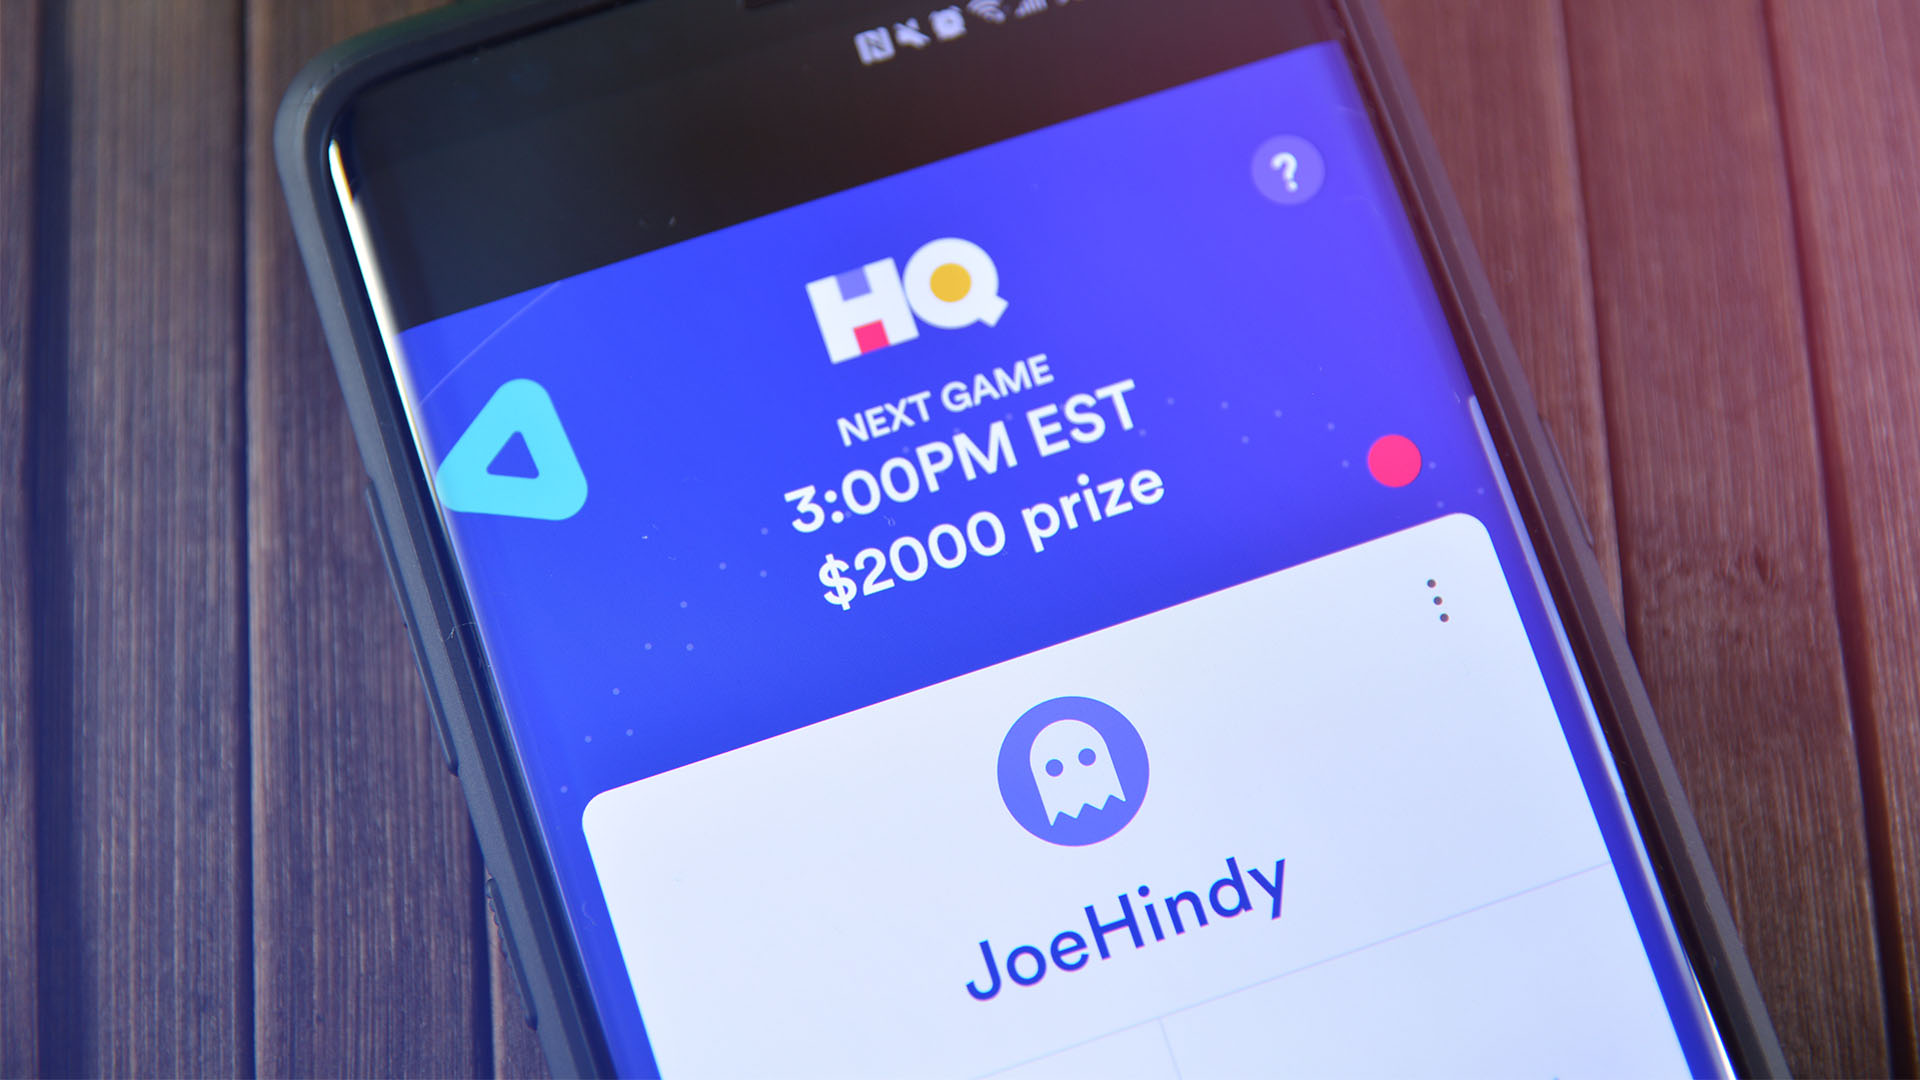 HQ Trivia featured image for real